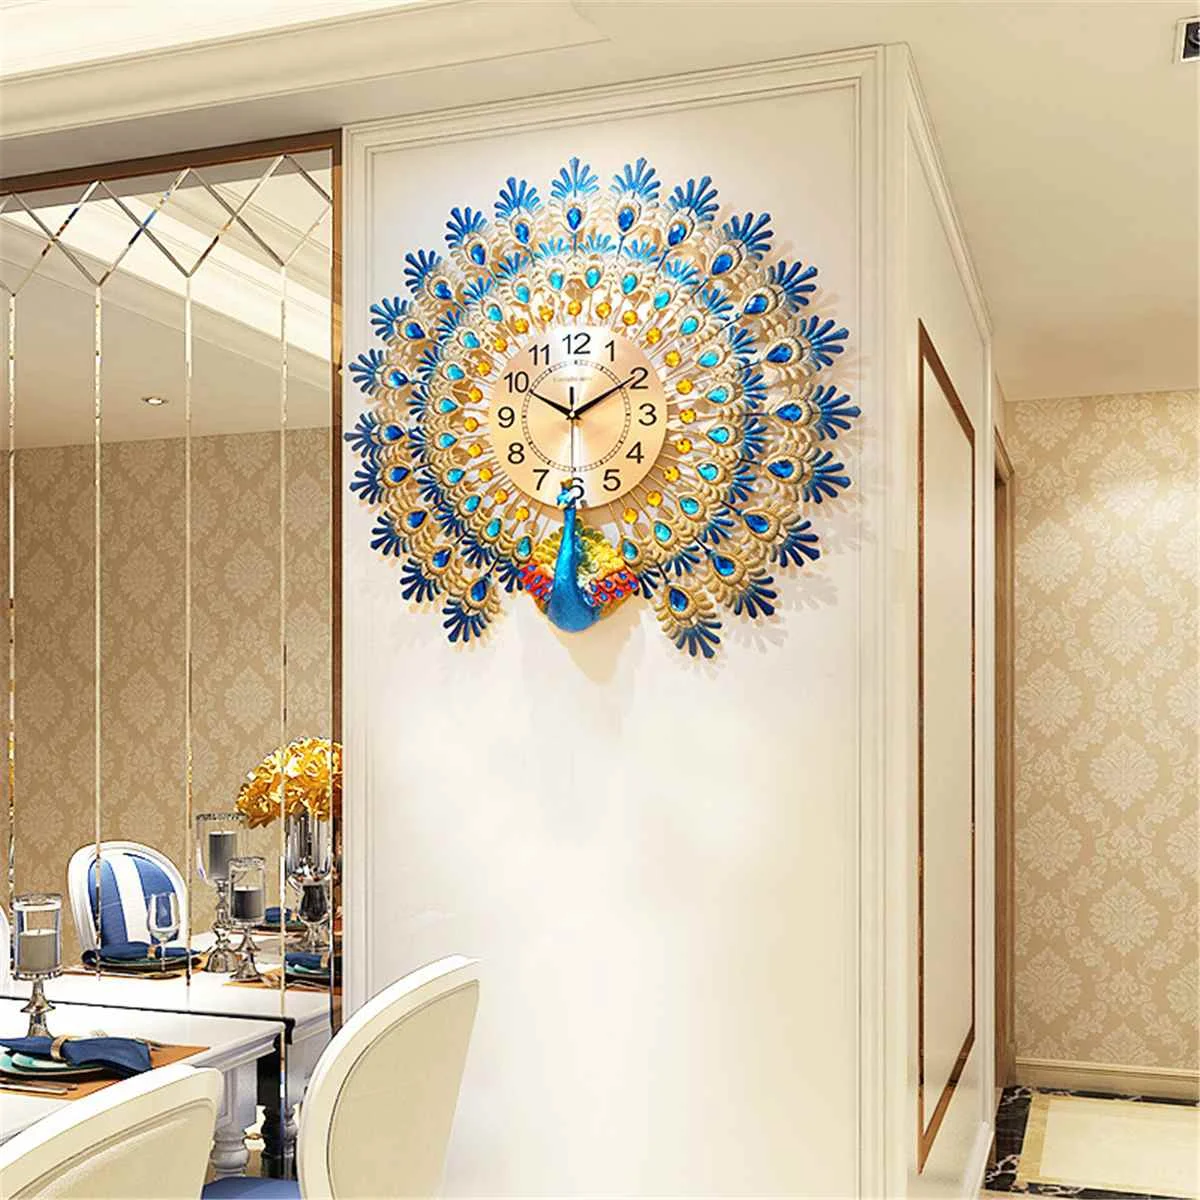 Metal Design 23.7 inch Large Peacock Wall Clock Non-Ticking Digital Wall Clocks for Living Room Decor